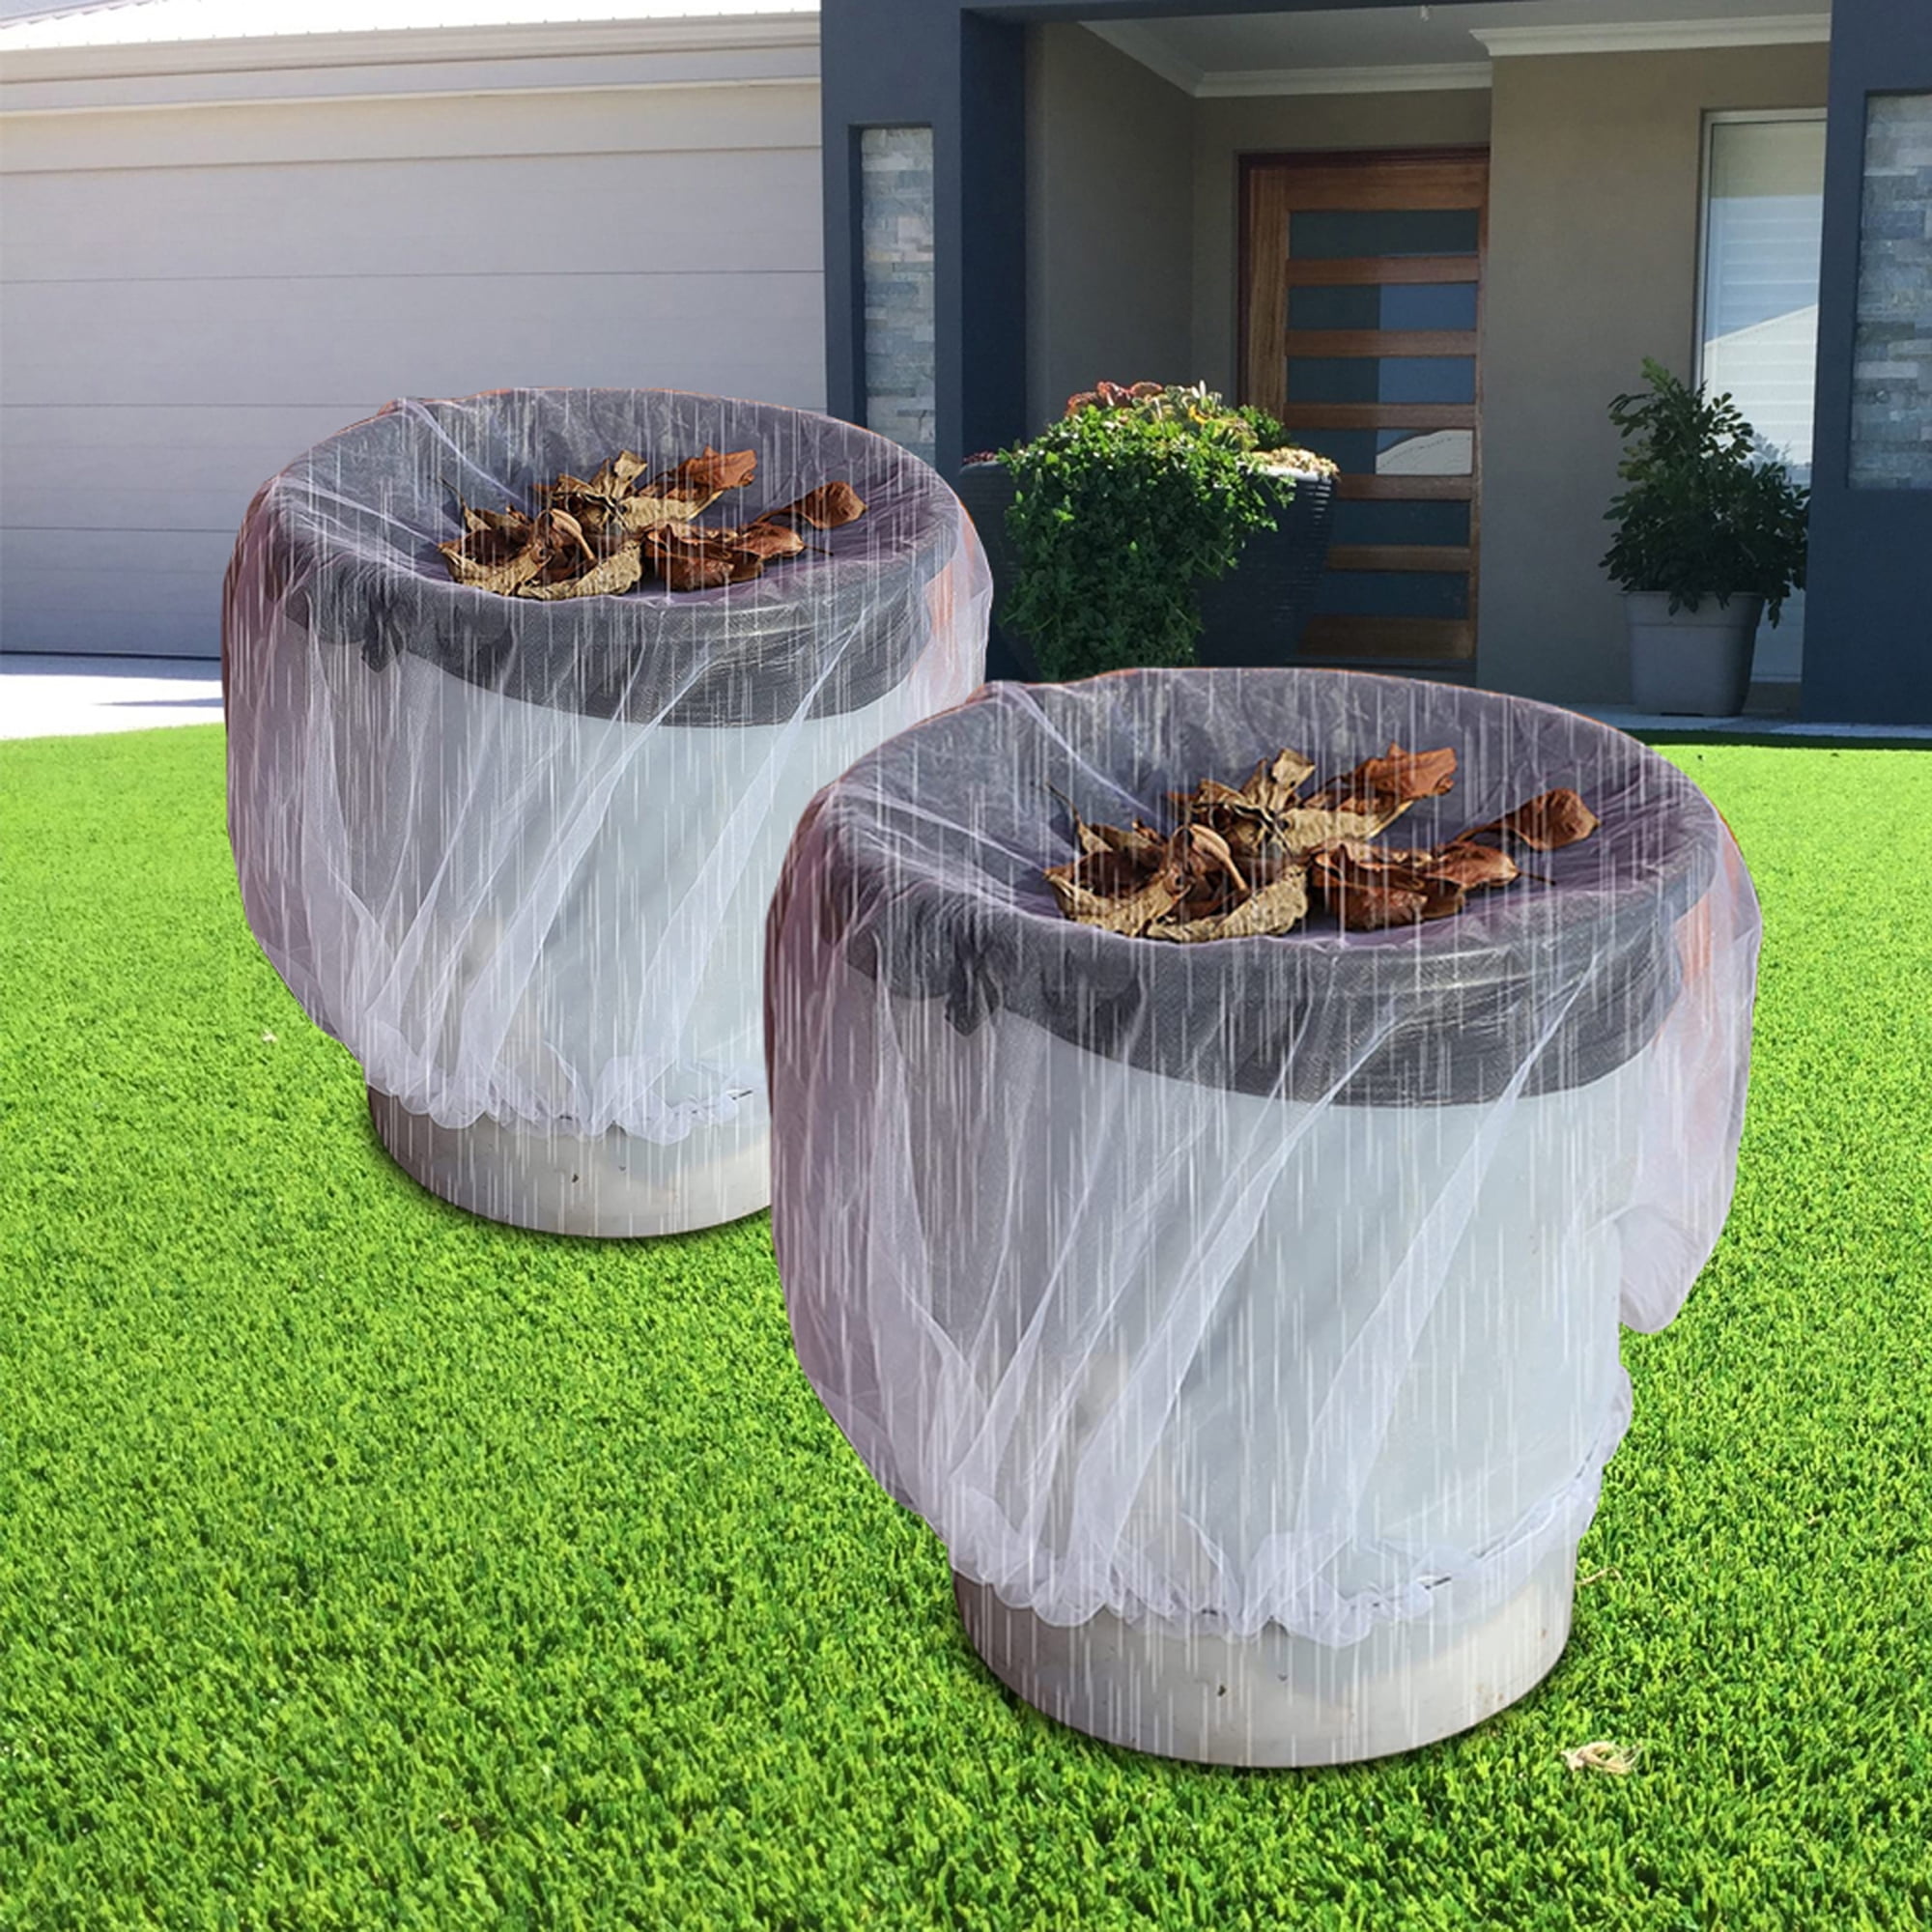 AOJIE Mesh Cover for Rain Barrels,Rain-Barrel-Net with Drawstring,Rain Water Barrel Cover Collection Leaves for Outdoor Garden,Rain Harvesting Tool Protector